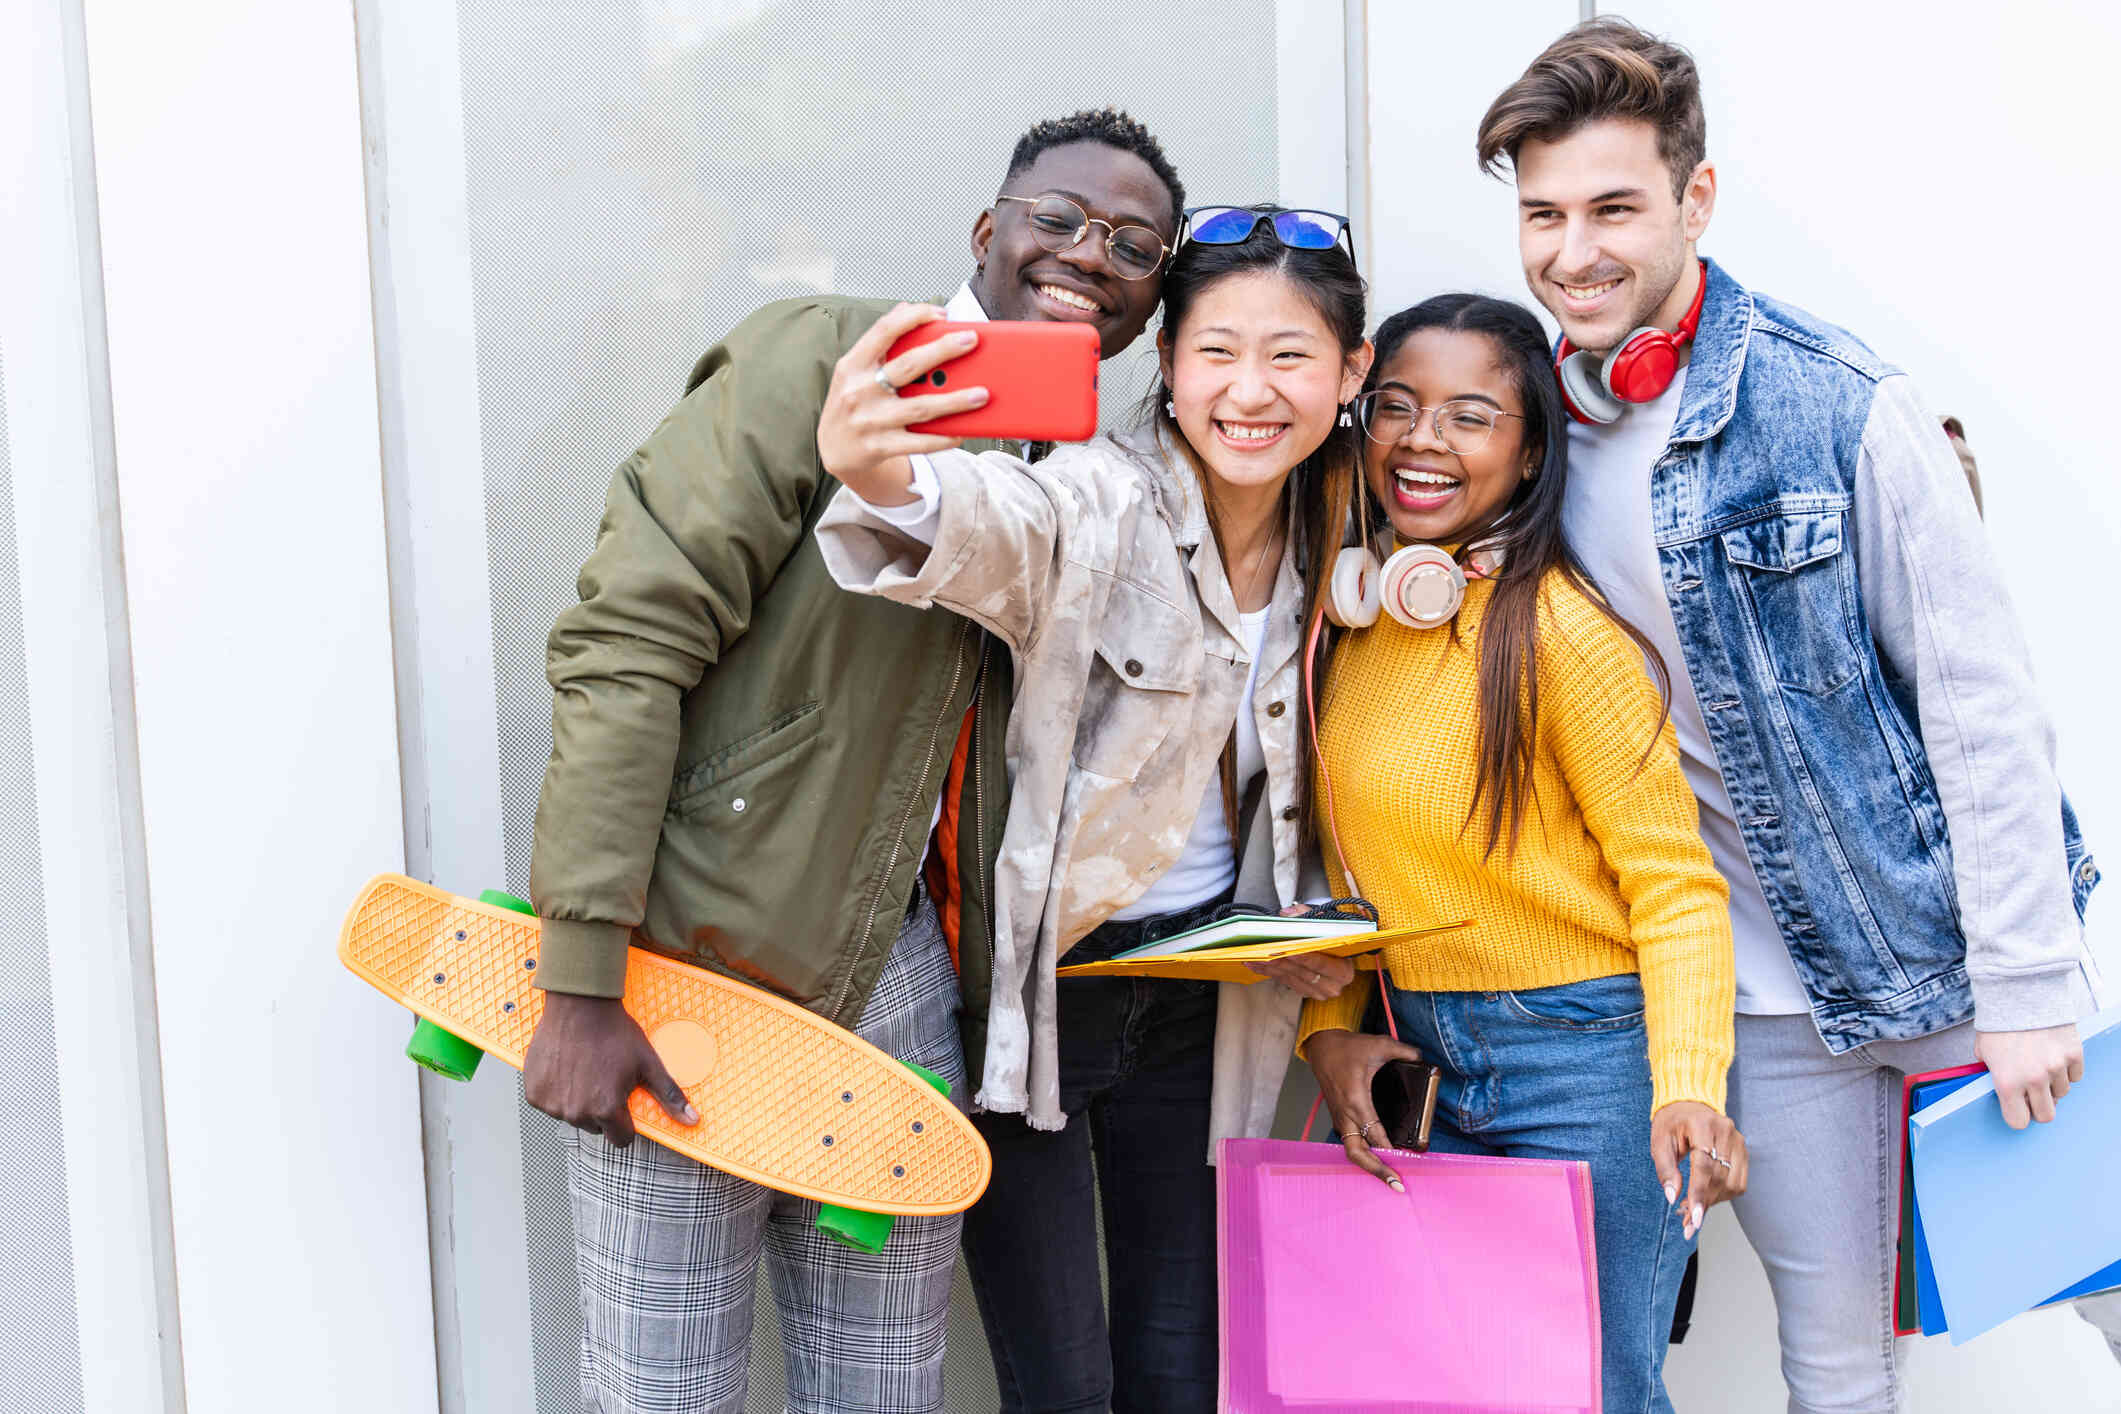 A group of four teenagers stand outside and gather together to take a selfie while smiling.